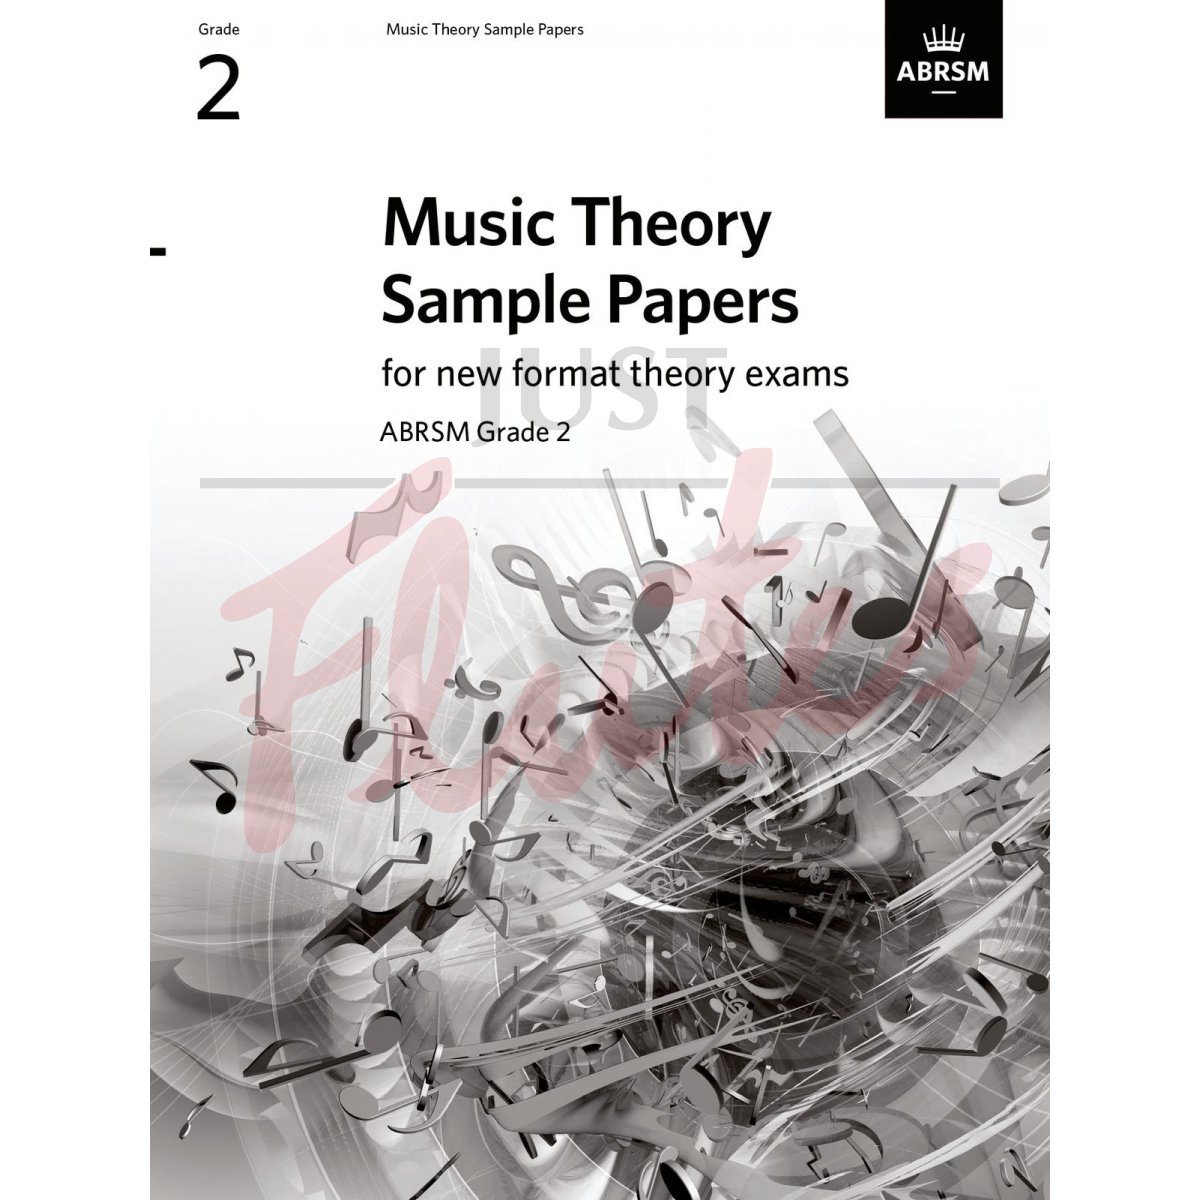 Music Theory Sample Papers Grade 2